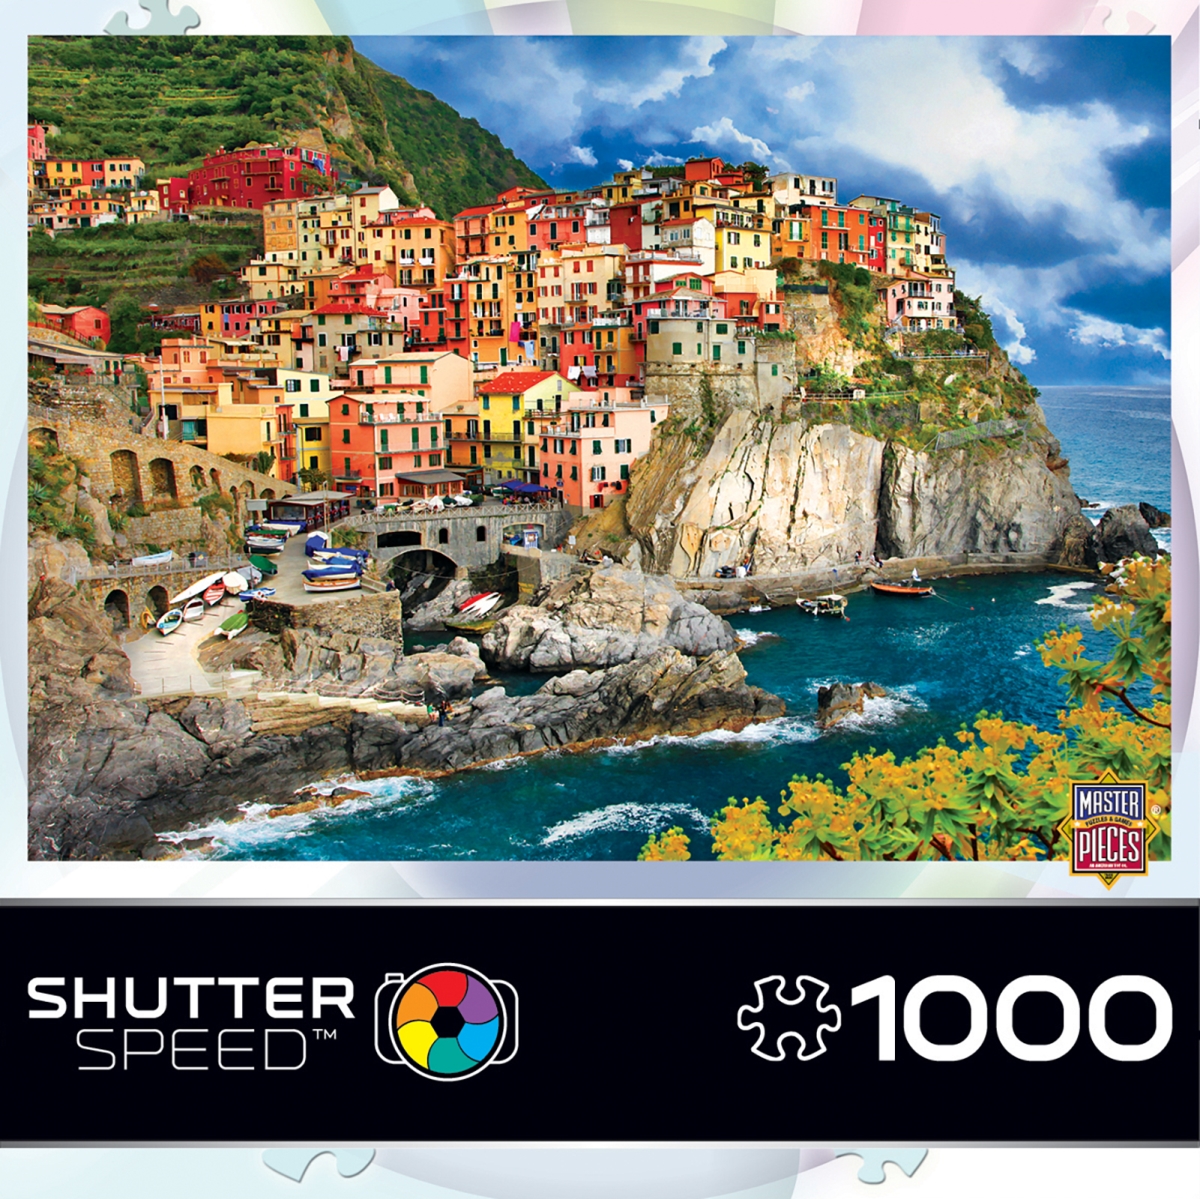 71604 Shutterspeed Edge Of The World Puzzle - 1000 Piece